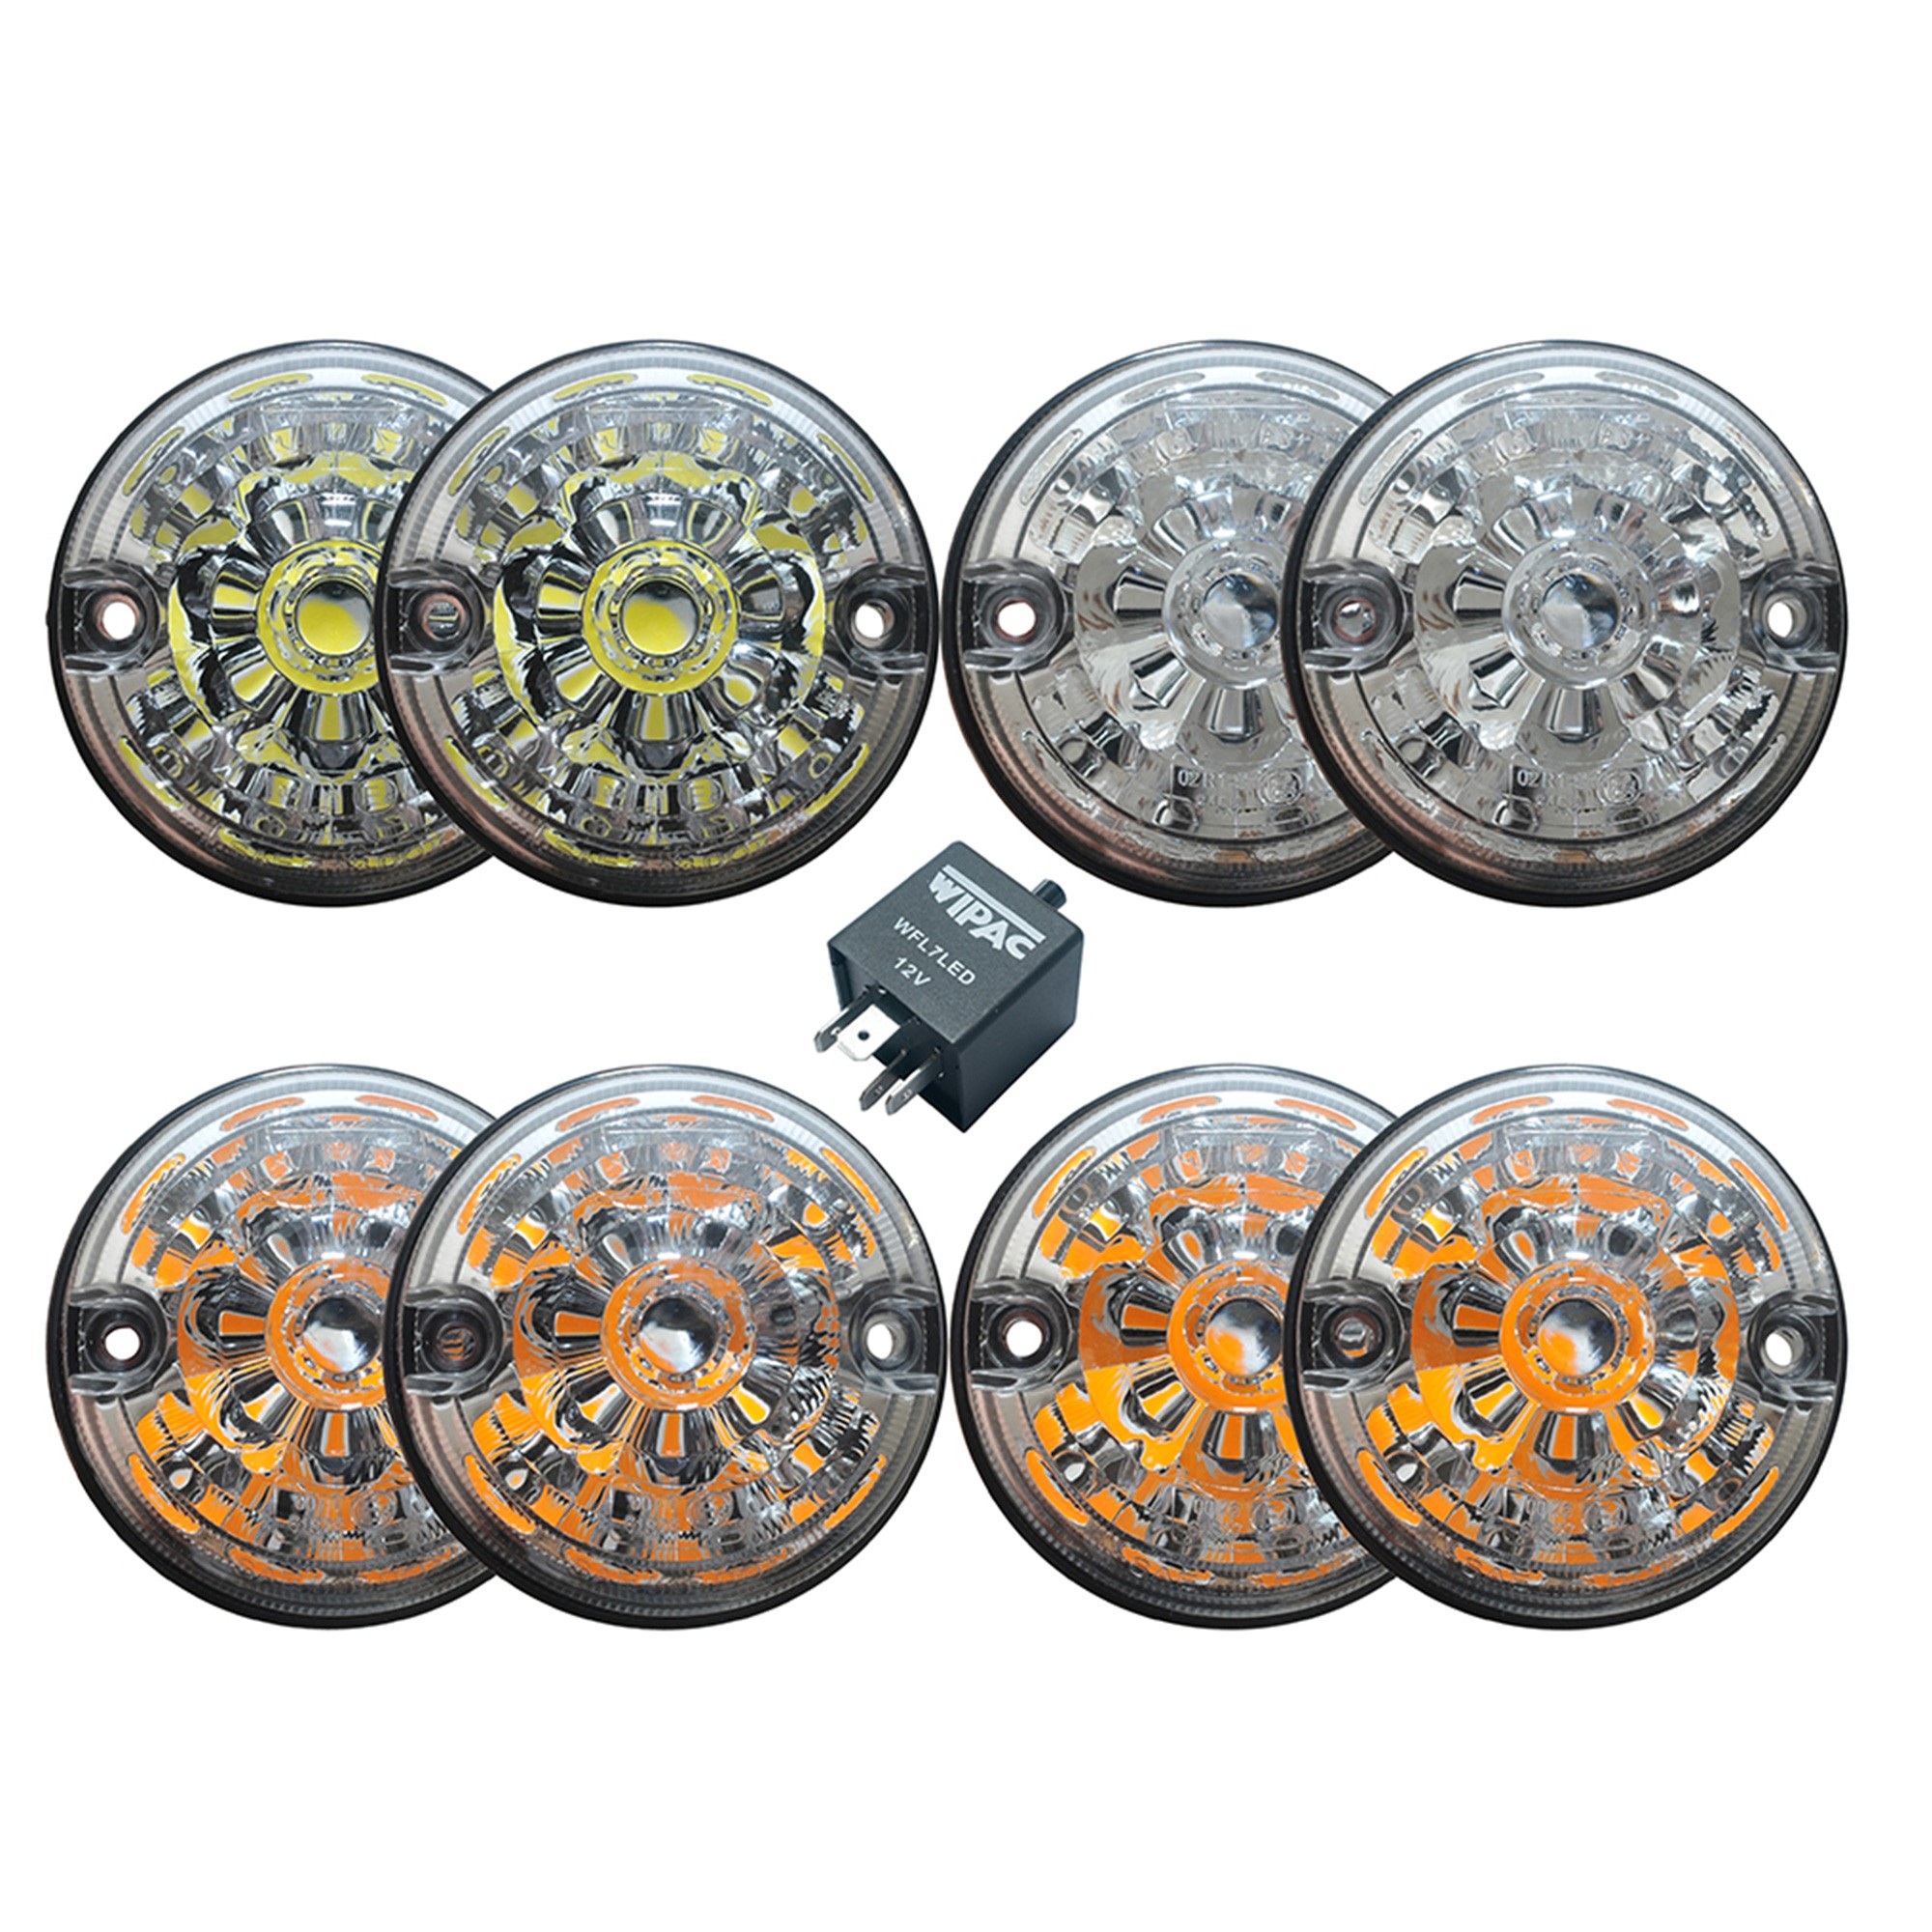 Wipac Wipac LED Clear Indicator Light/lamp Land Rover Defender 90/110 Series 73mm 